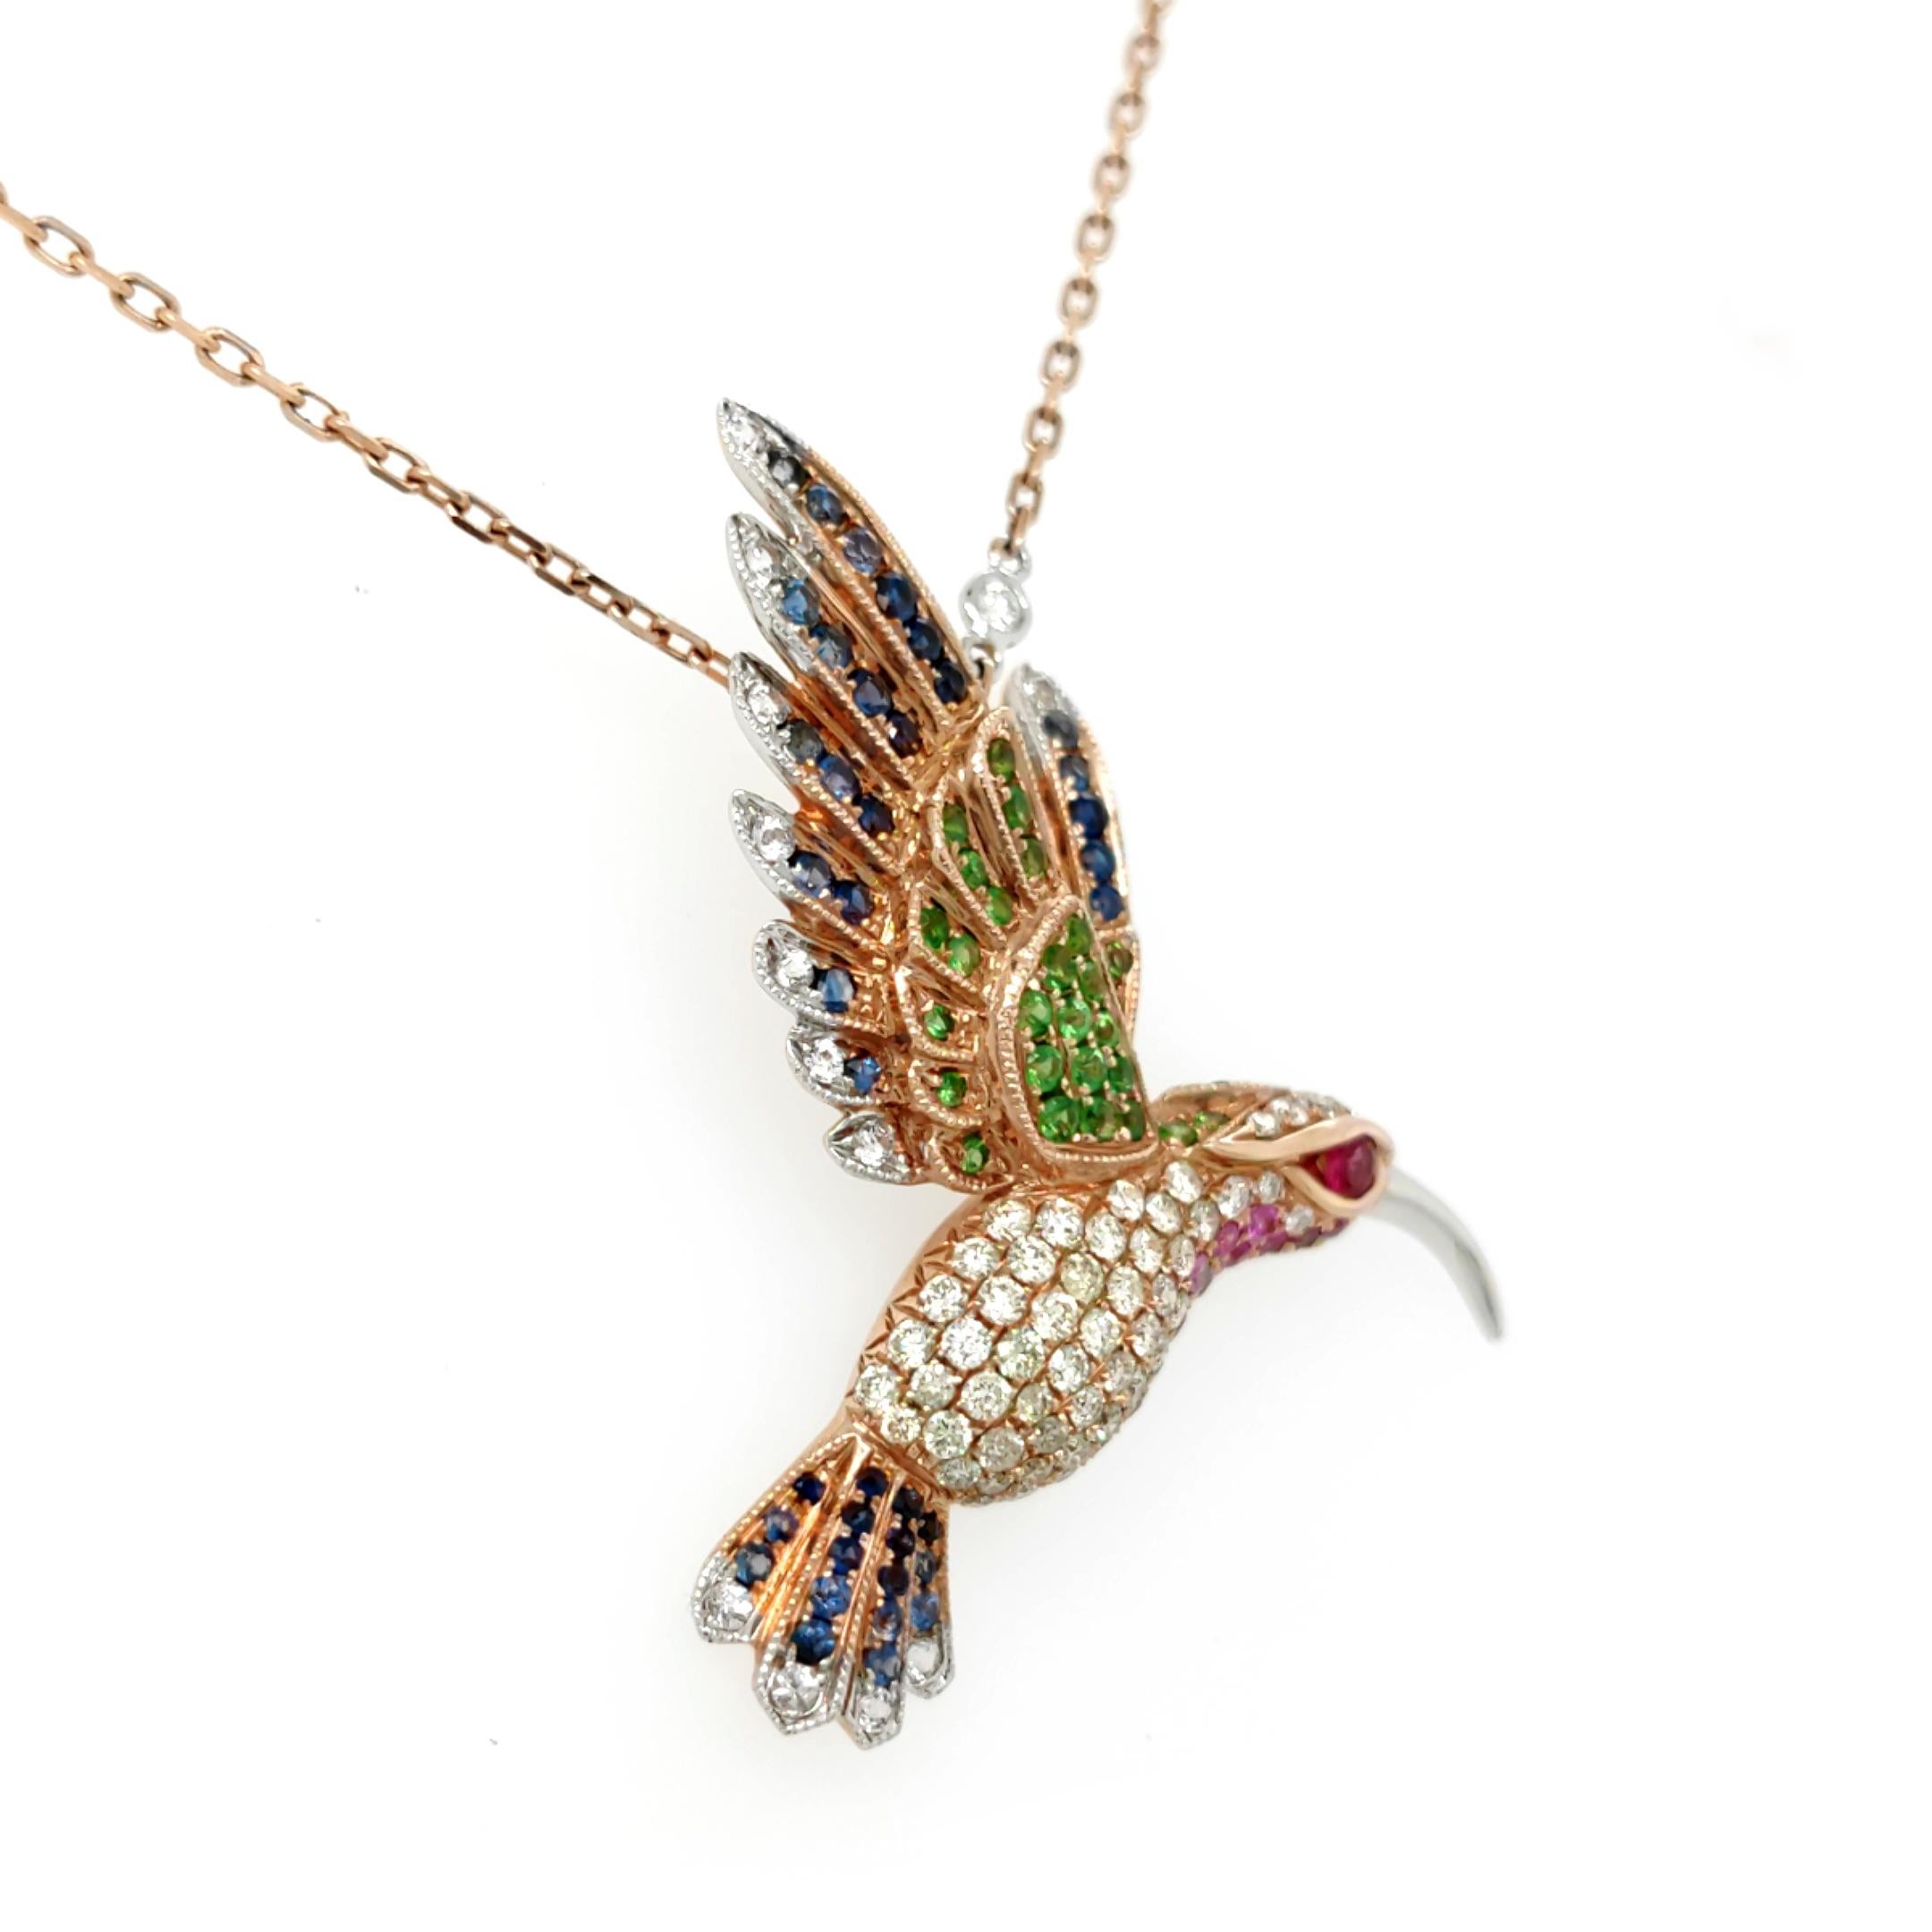 18K Rose Gold Hummingbird Colored Diamond Pendant Necklace with Blue Sapphires
Length: 16